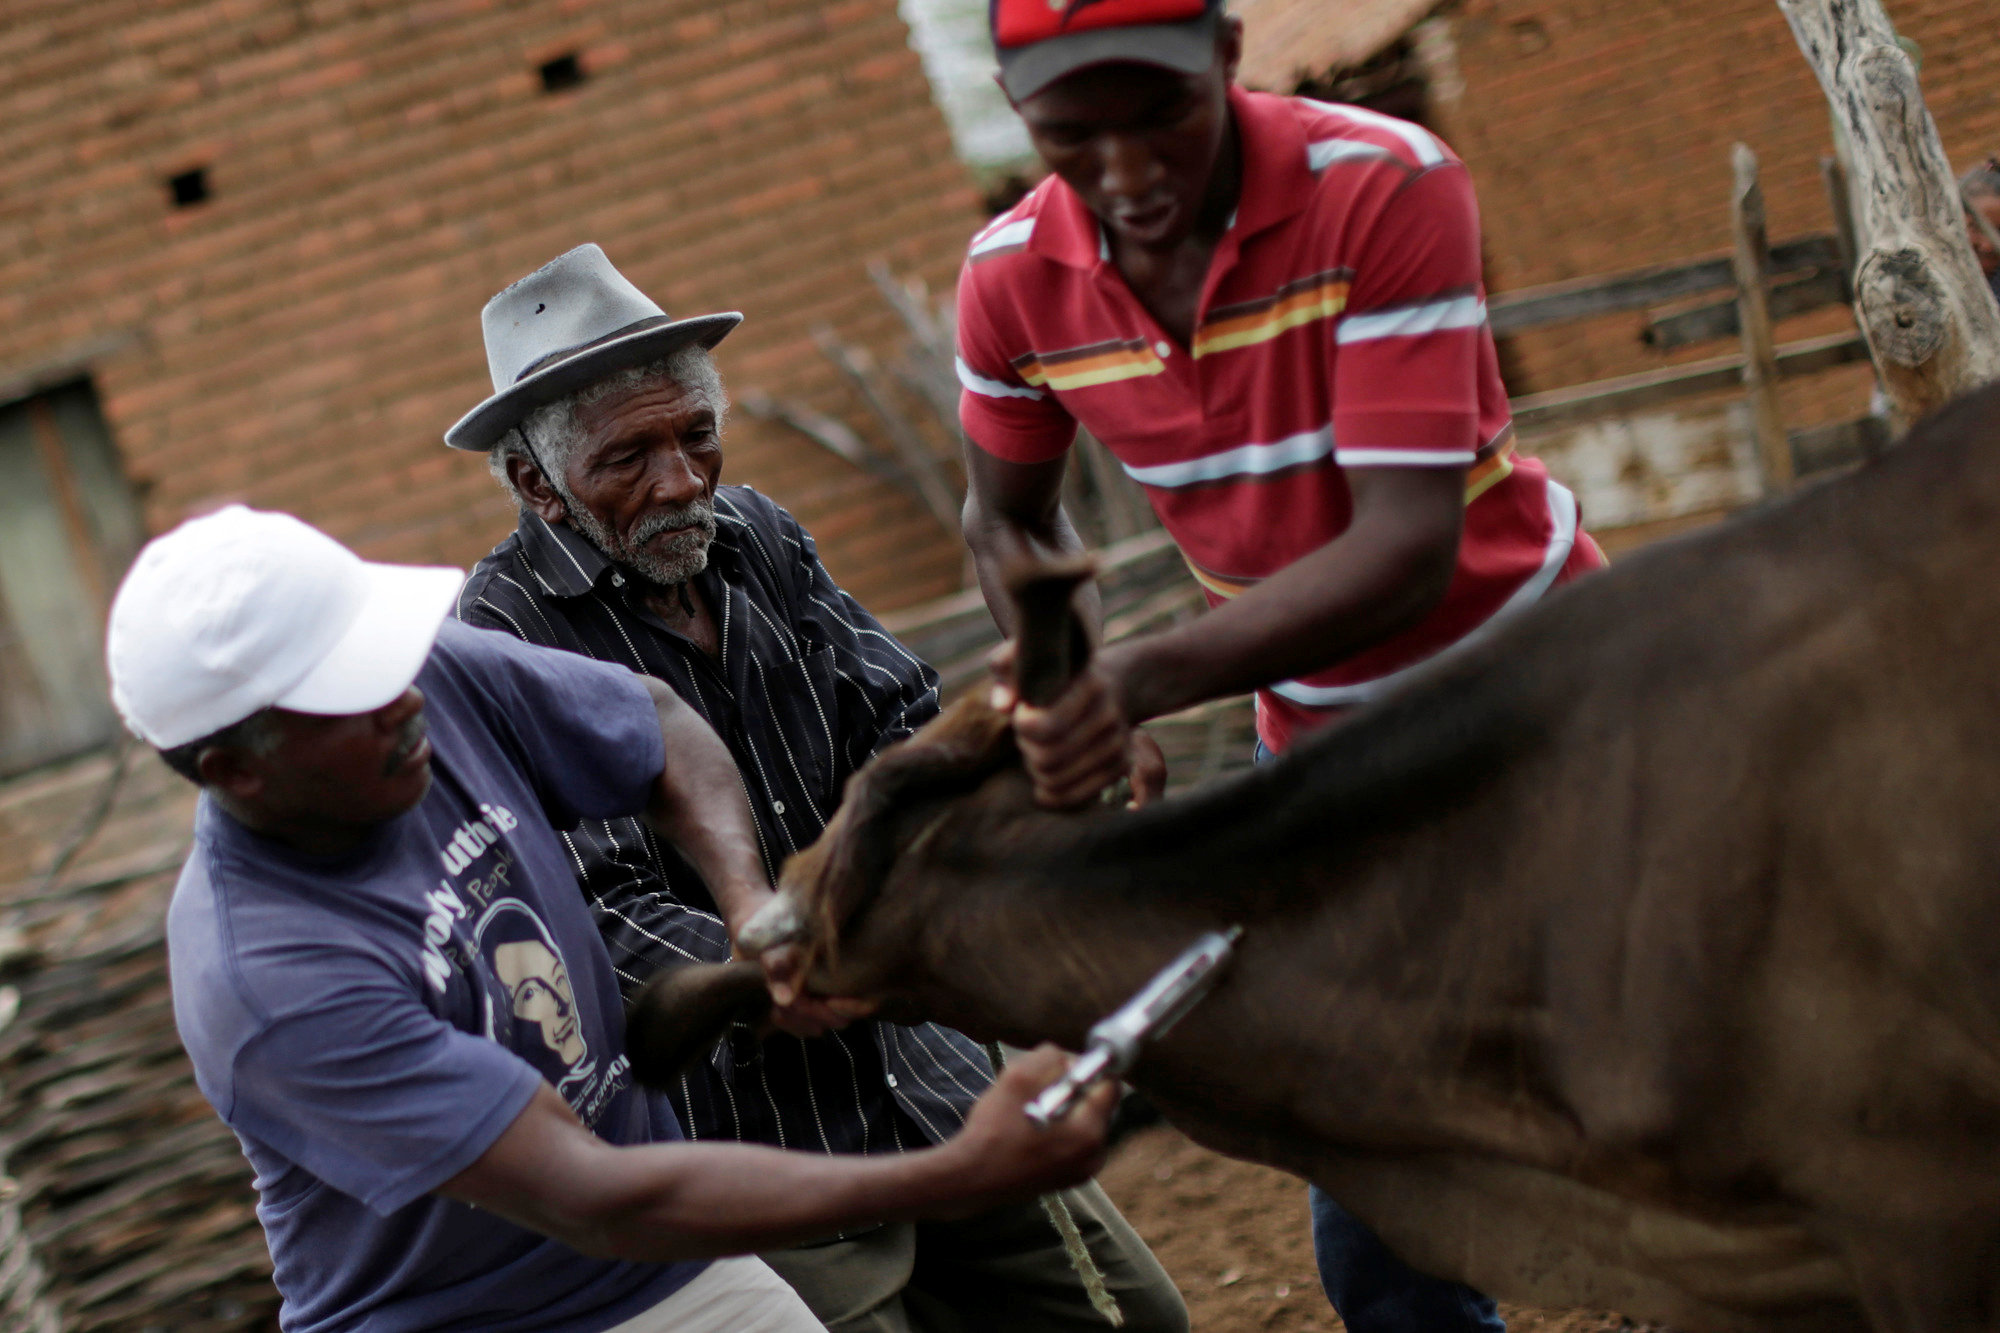 Francisco Barbosa Cruz (C), 82, and his grandson (R) vaccinate a cow in Pombal, Paraiba state, Brazil, February 11, 2017. REUTERS/Ueslei Marcelino